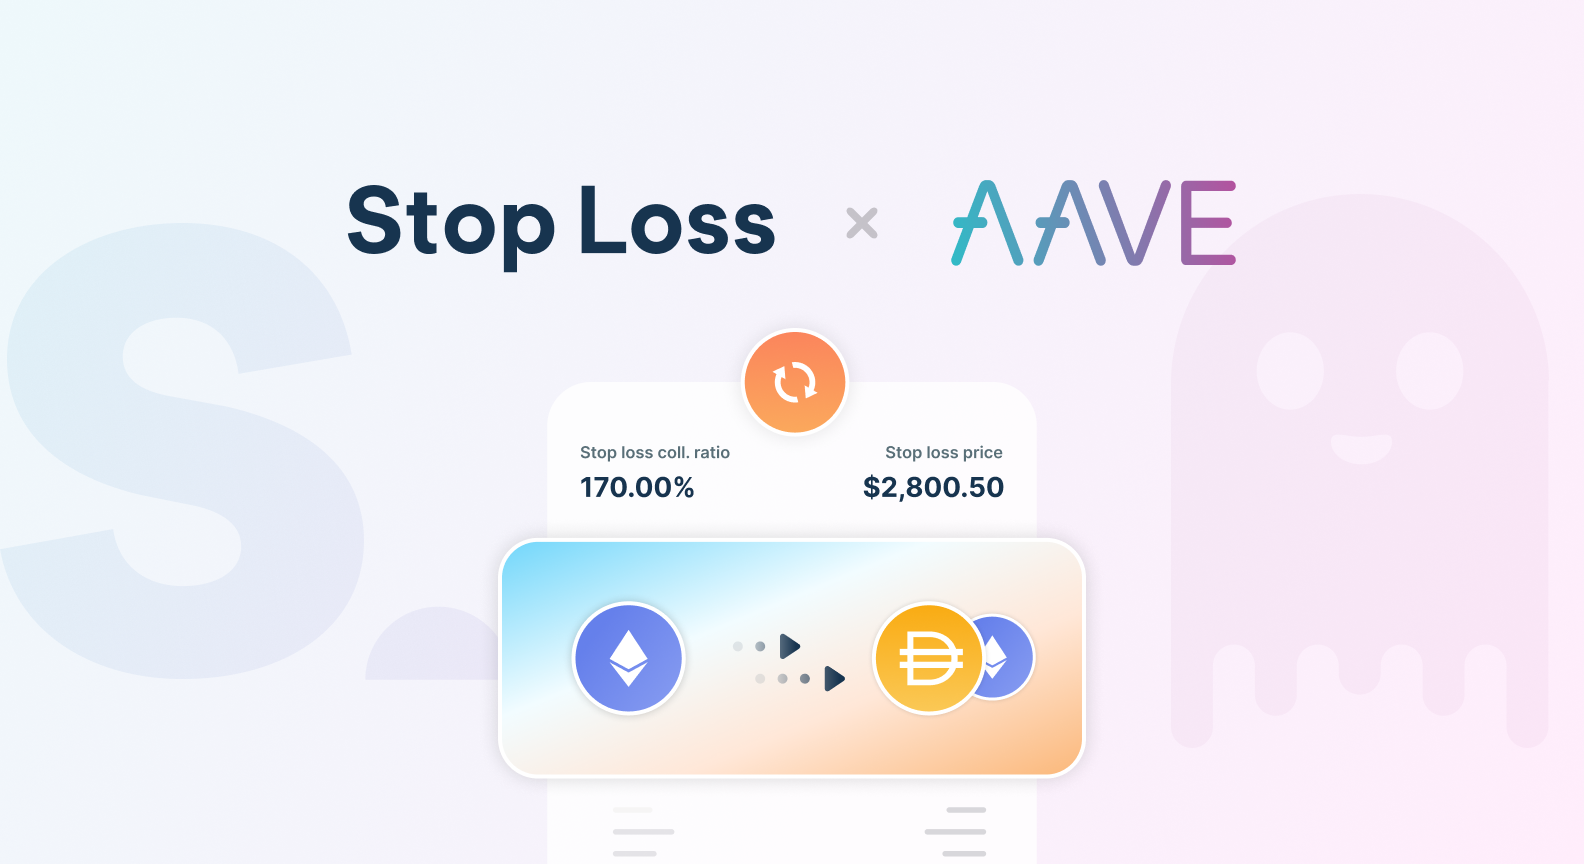 What is Stop Loss on AAVE?